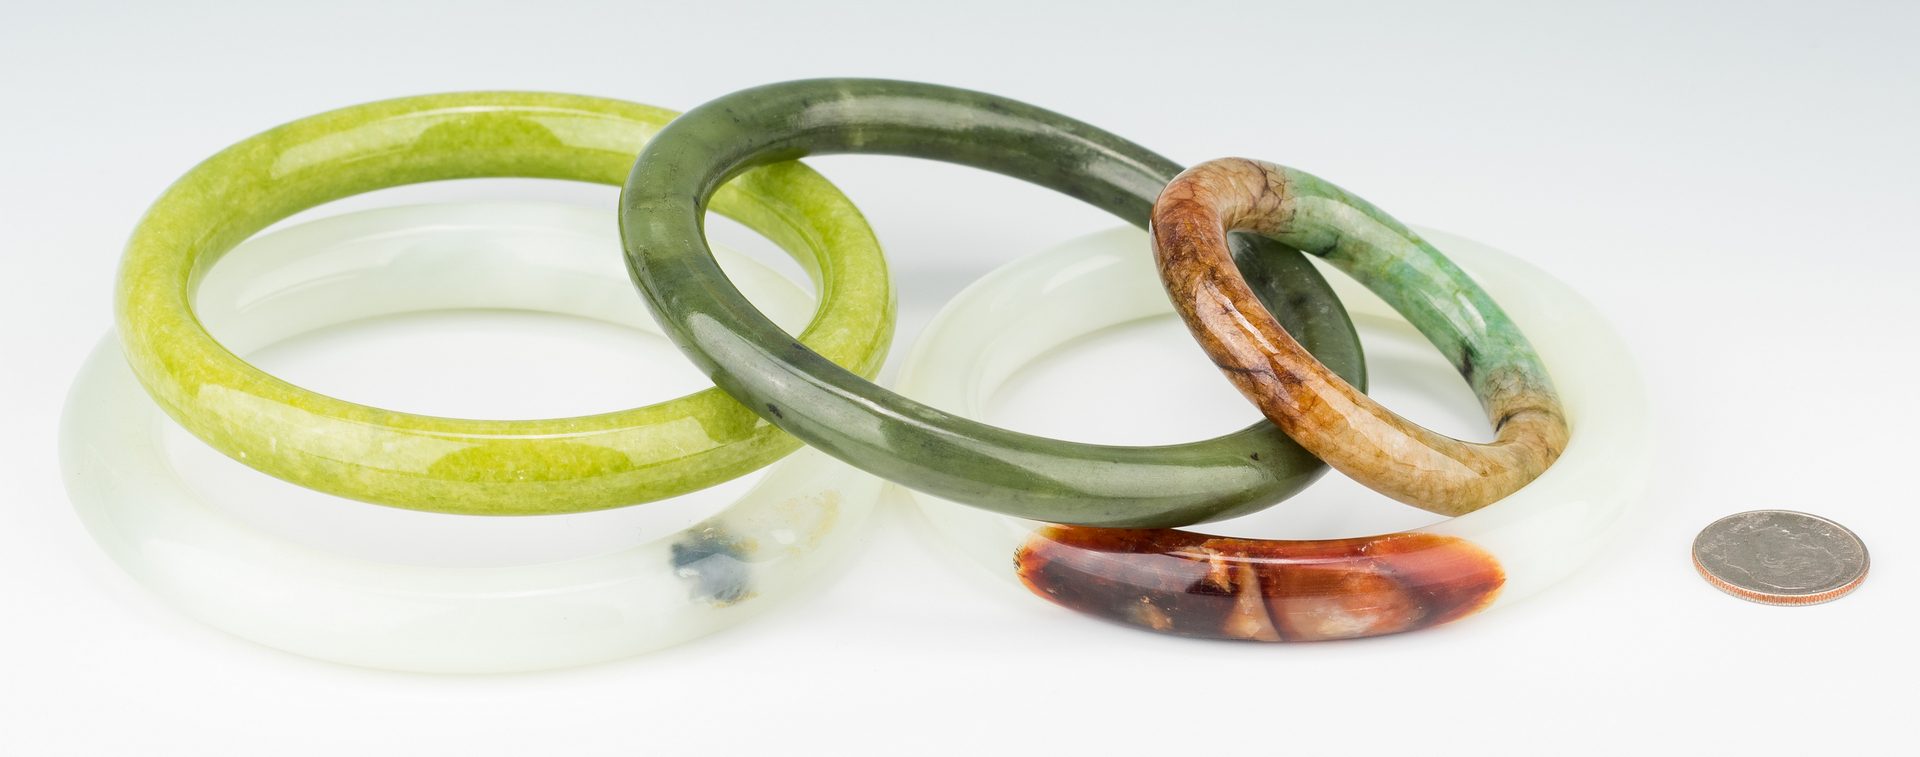 Lot 408: 5 Chinese Carved Jade Bangles